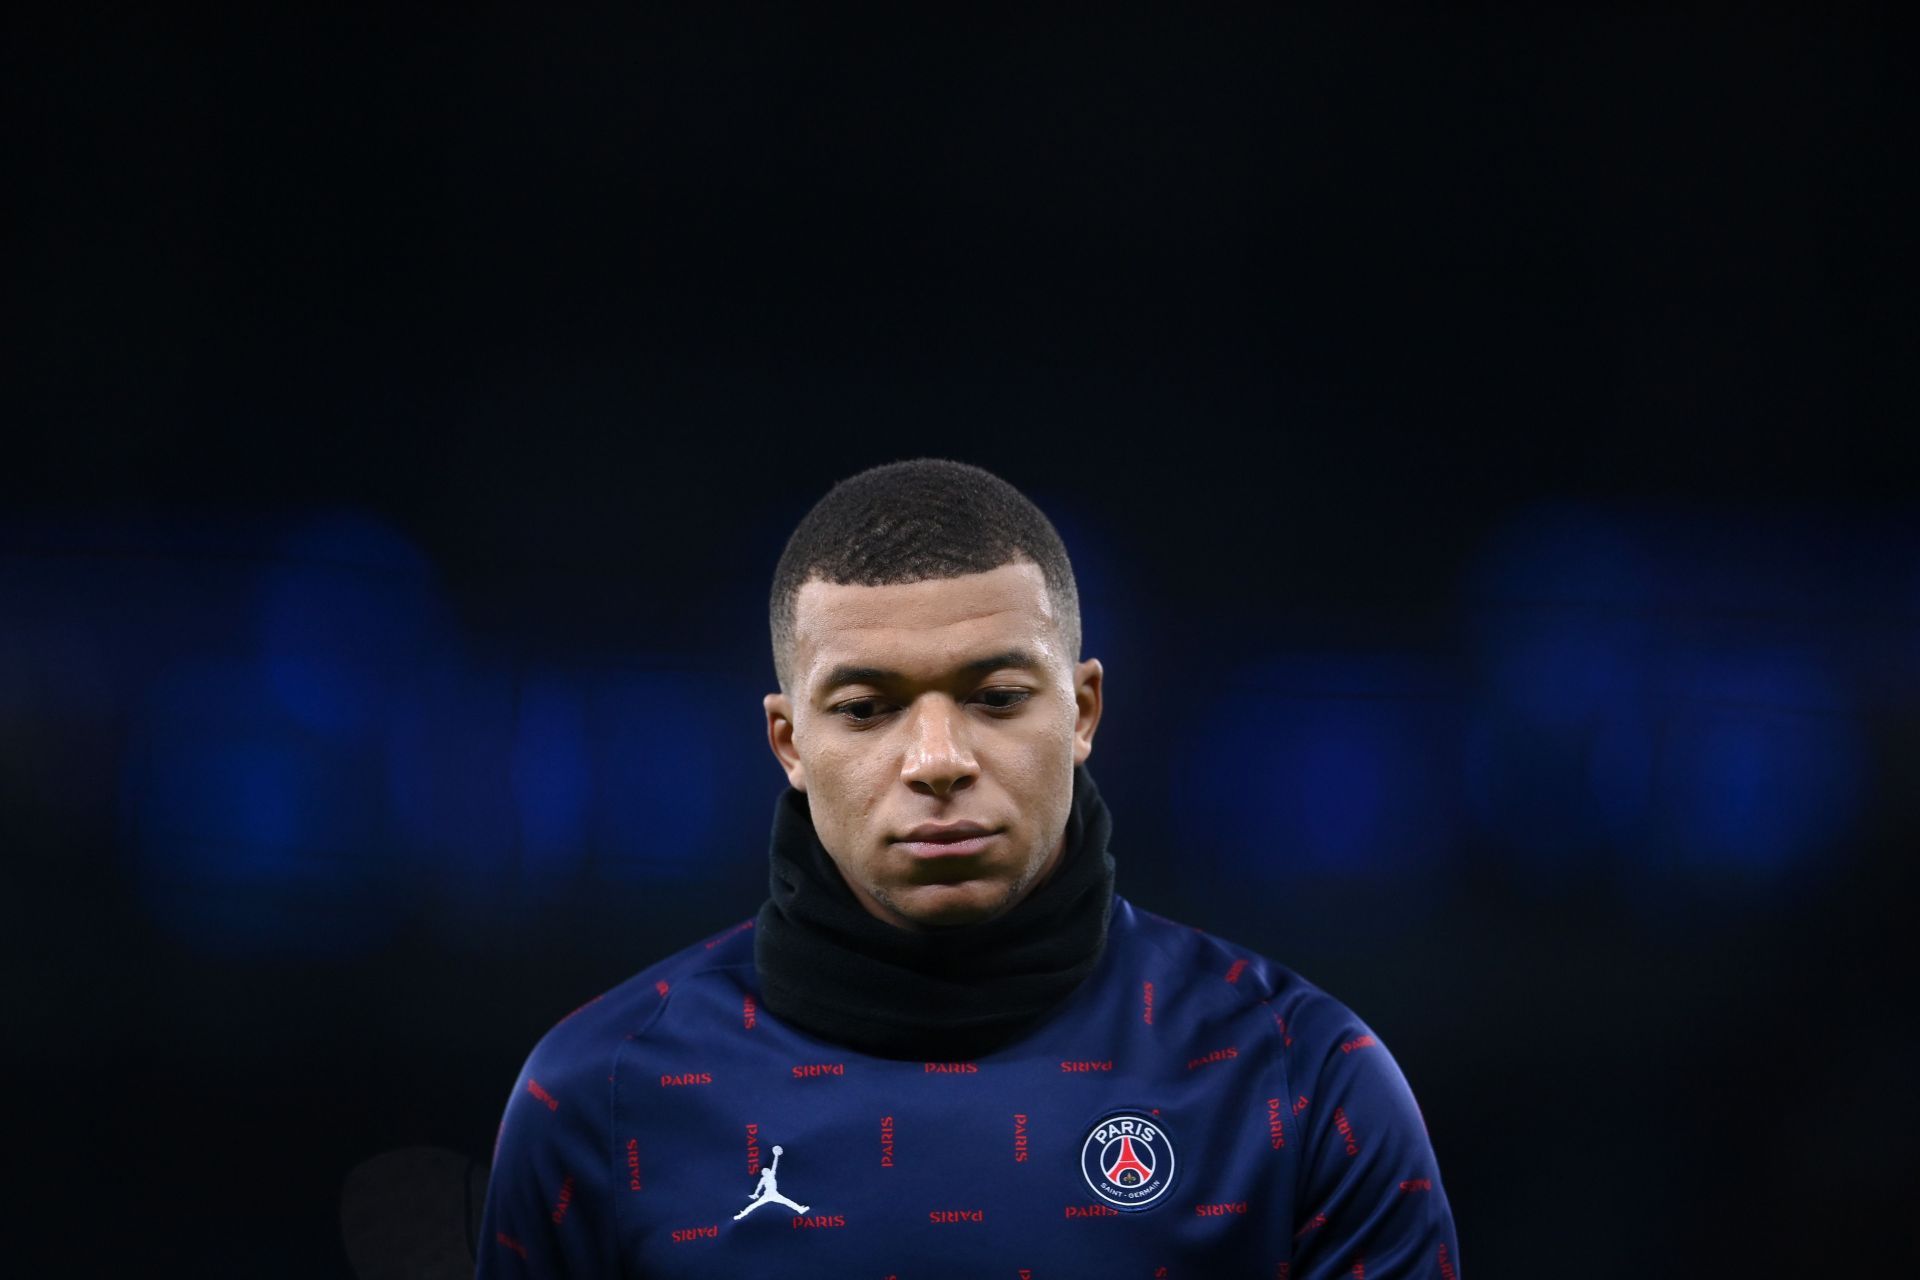 Kylian Mbappe is one of the best young players in the world right now.